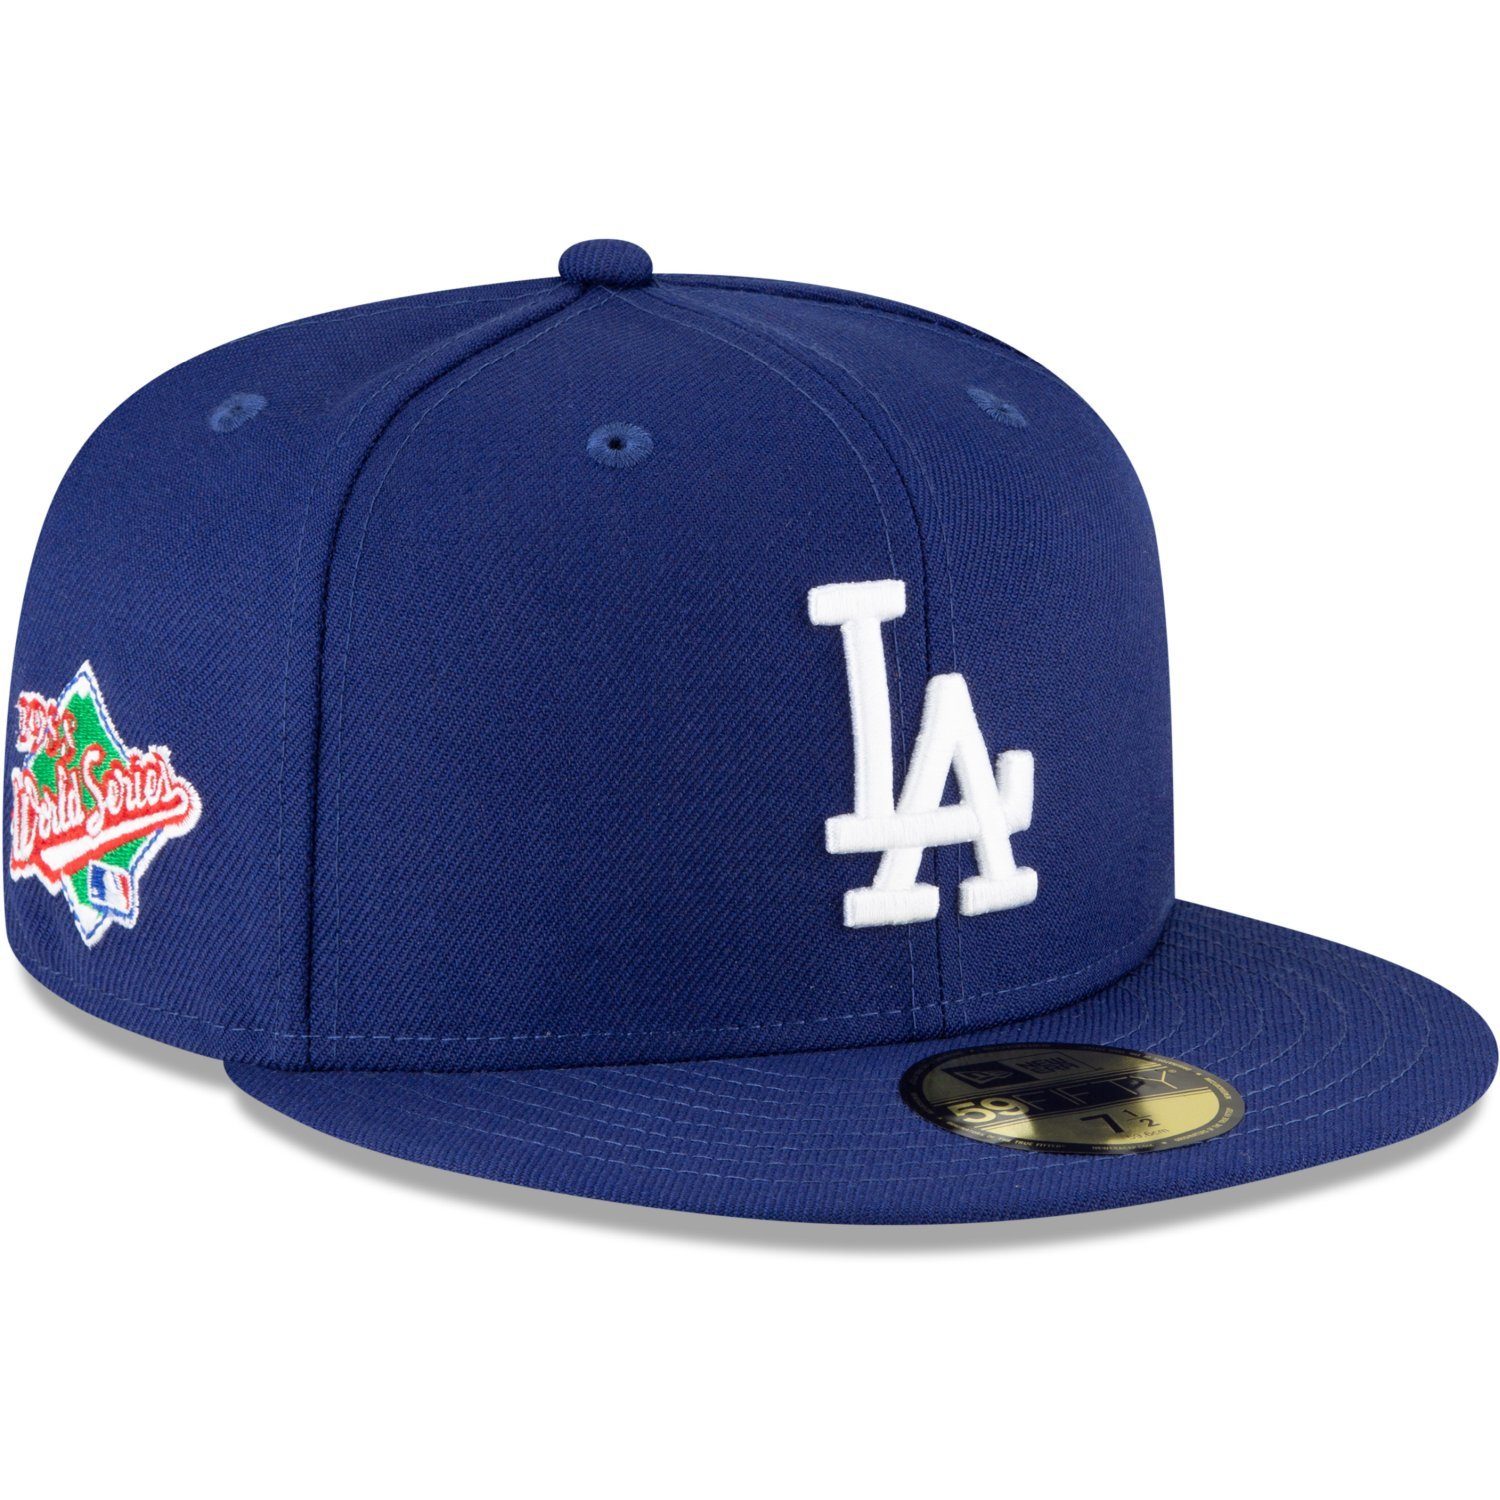 New Era Fitted Cap 59Fifty WORLD SERIES Los Angeles Dodgers